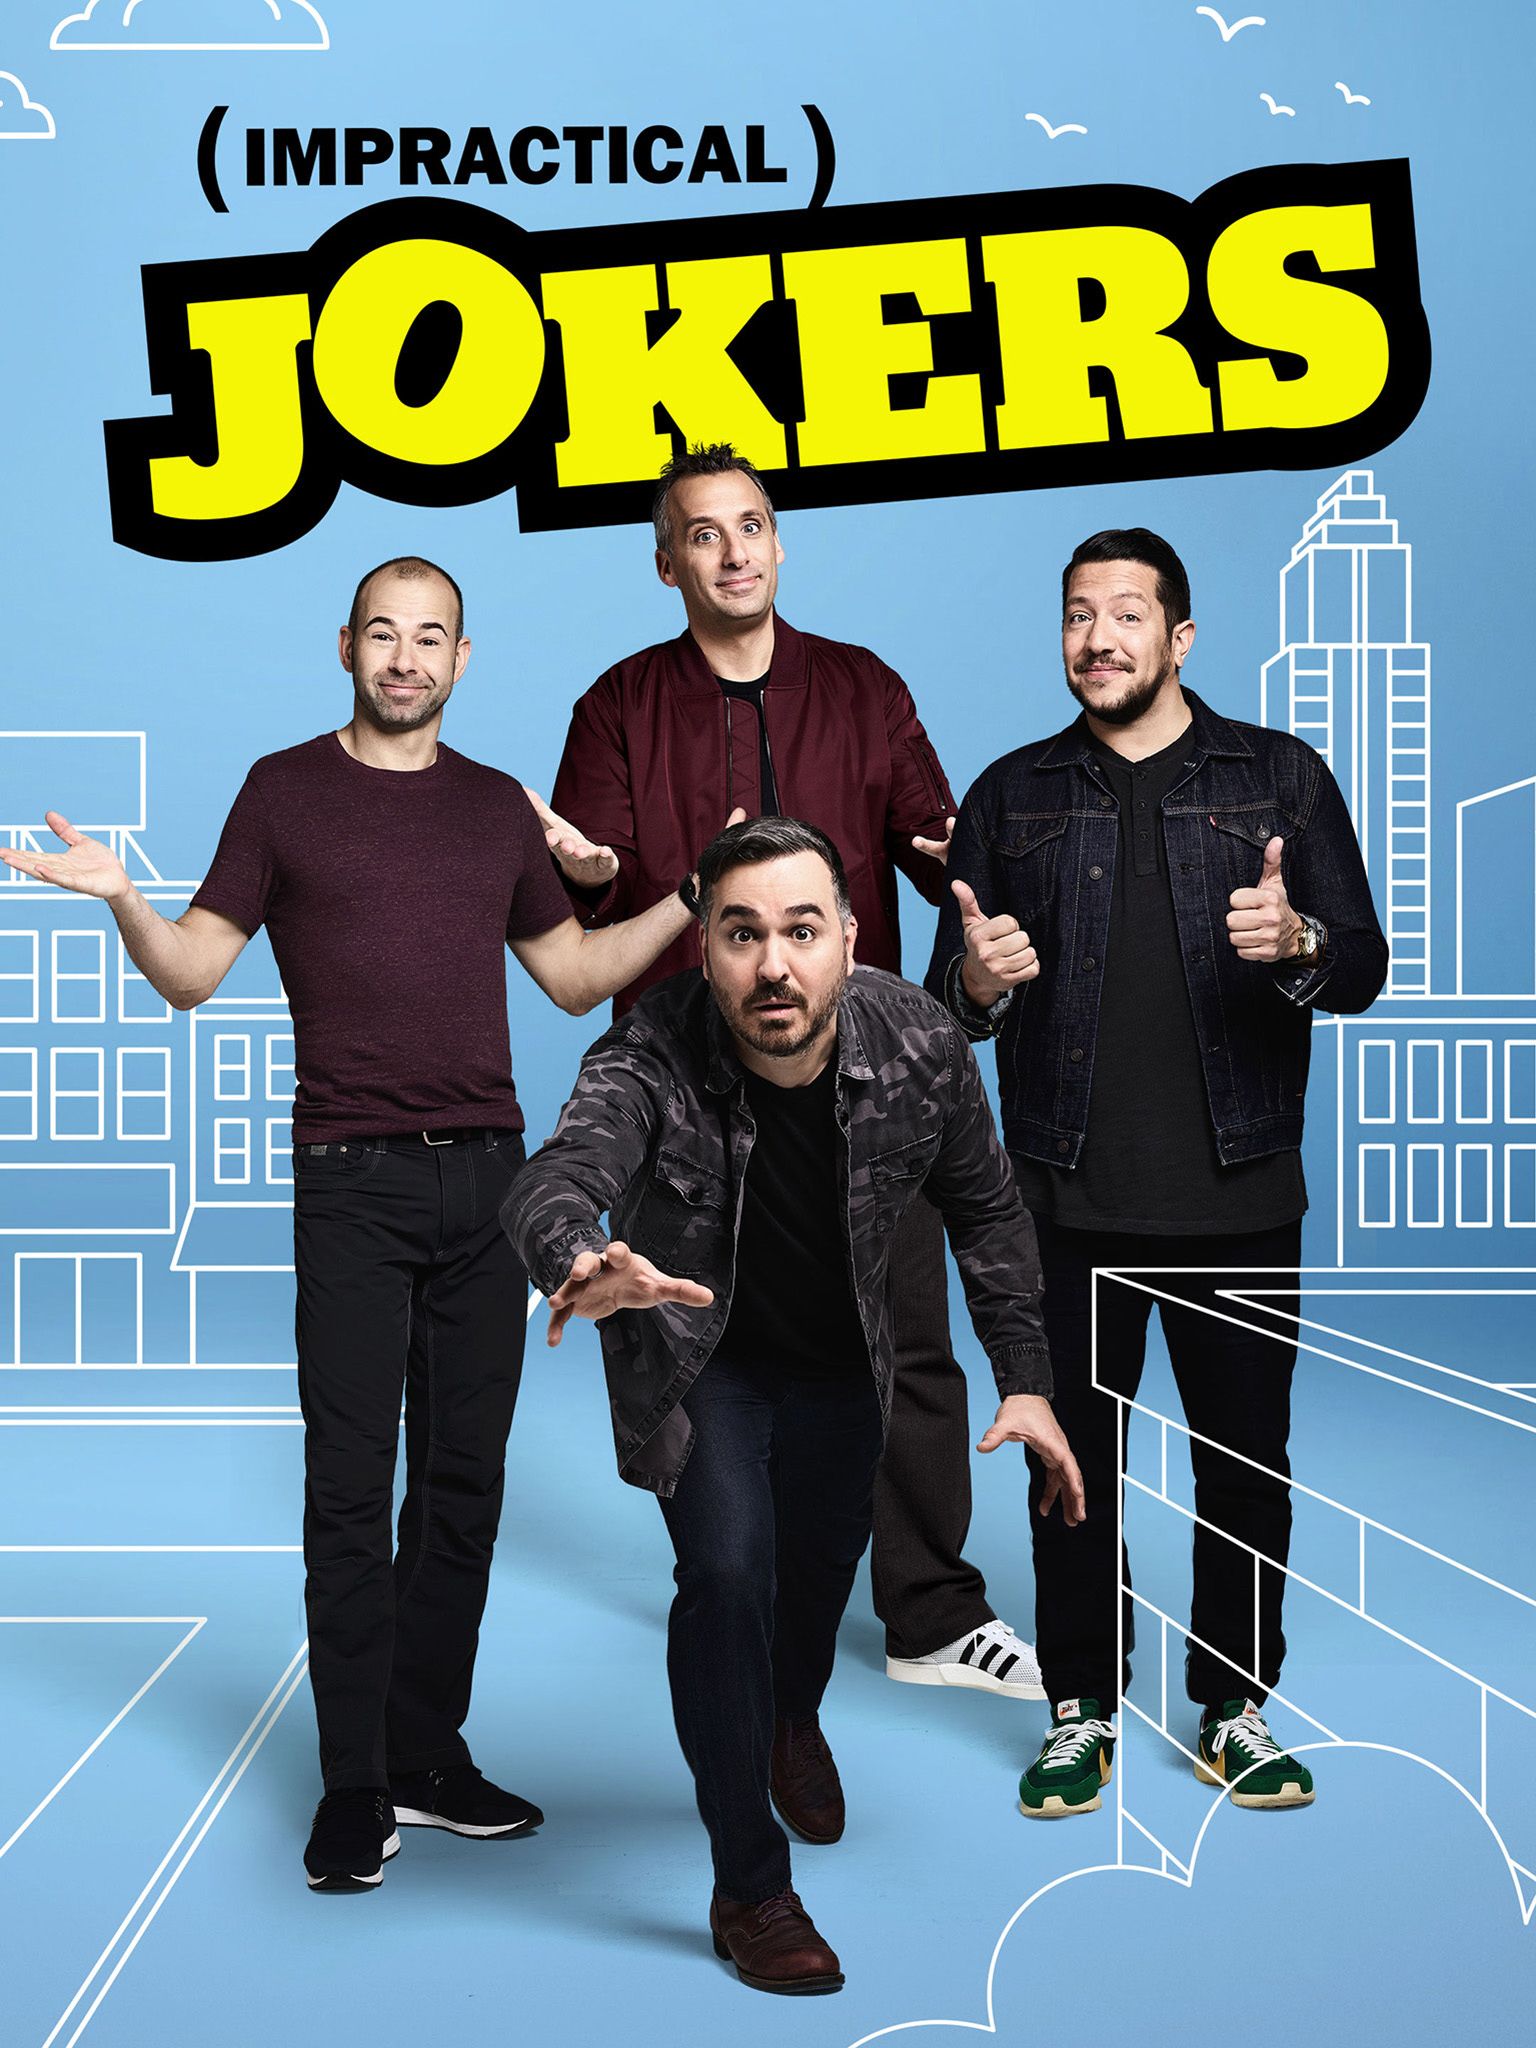 Impractical Jokers TV Show: News, Videos, Full Episodes and More